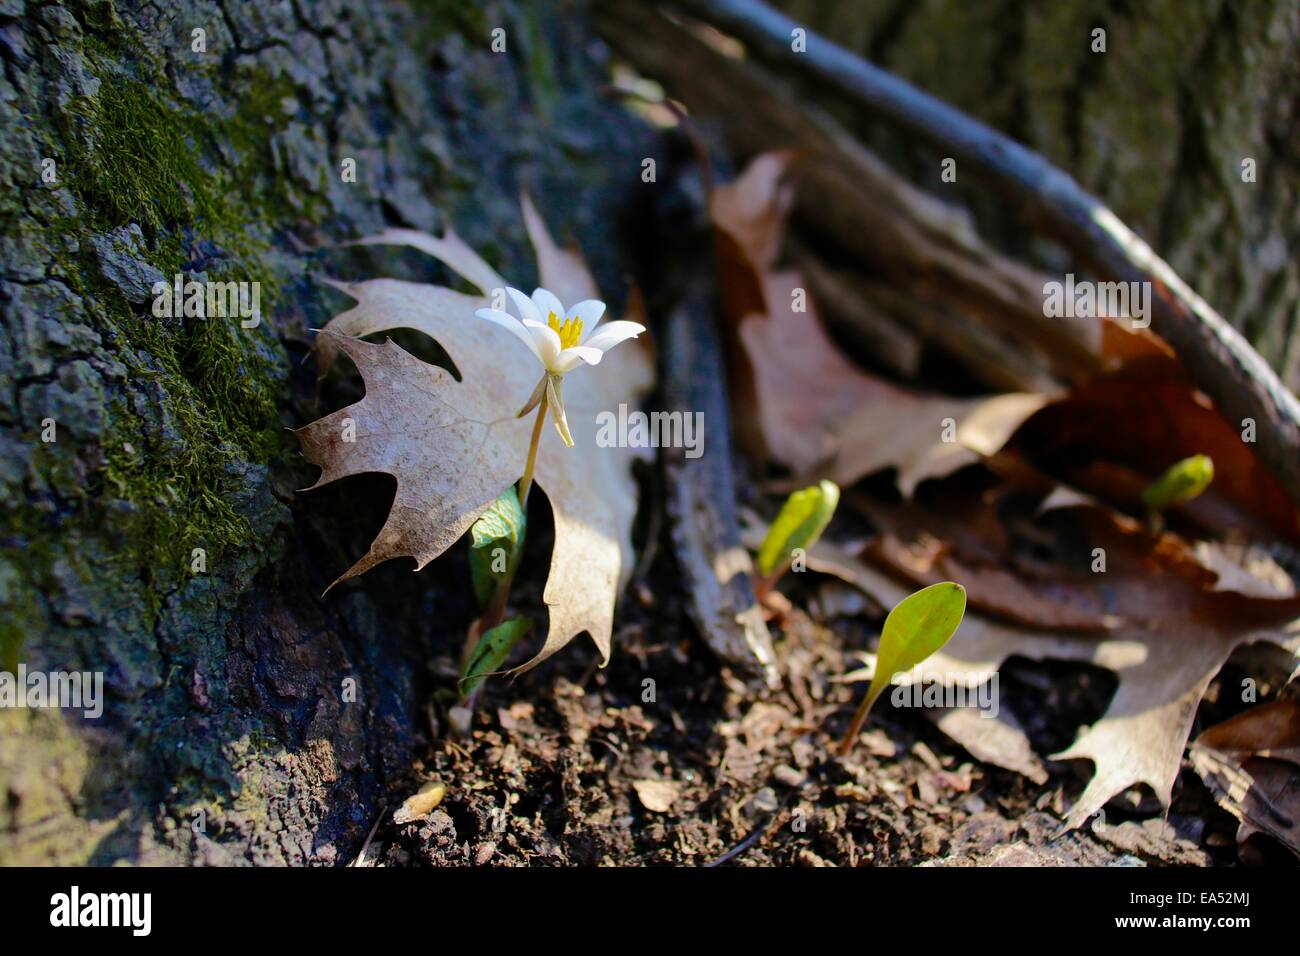 Bloodroot, Sanguinaria canadensis, a North American Spring ephemeral wildflower. Stock Photo